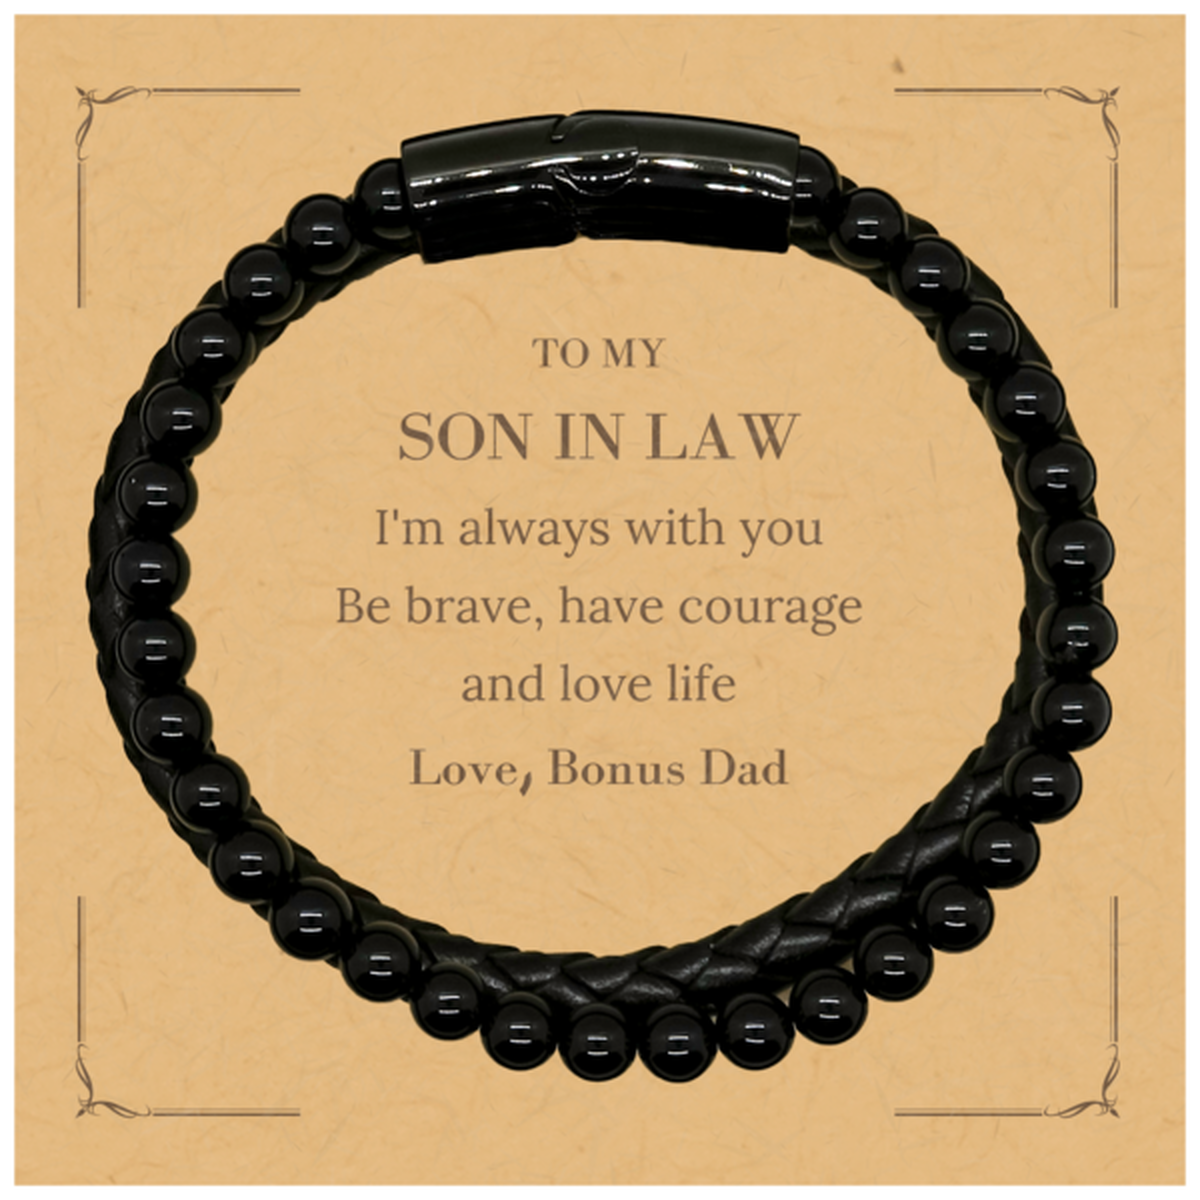 To My Son In Law Gifts from Bonus Dad, Unique Stone Leather Bracelets Inspirational Christmas Birthday Graduation Gifts for Son In Law I'm always with you. Be brave, have courage and love life. Love, Bonus Dad